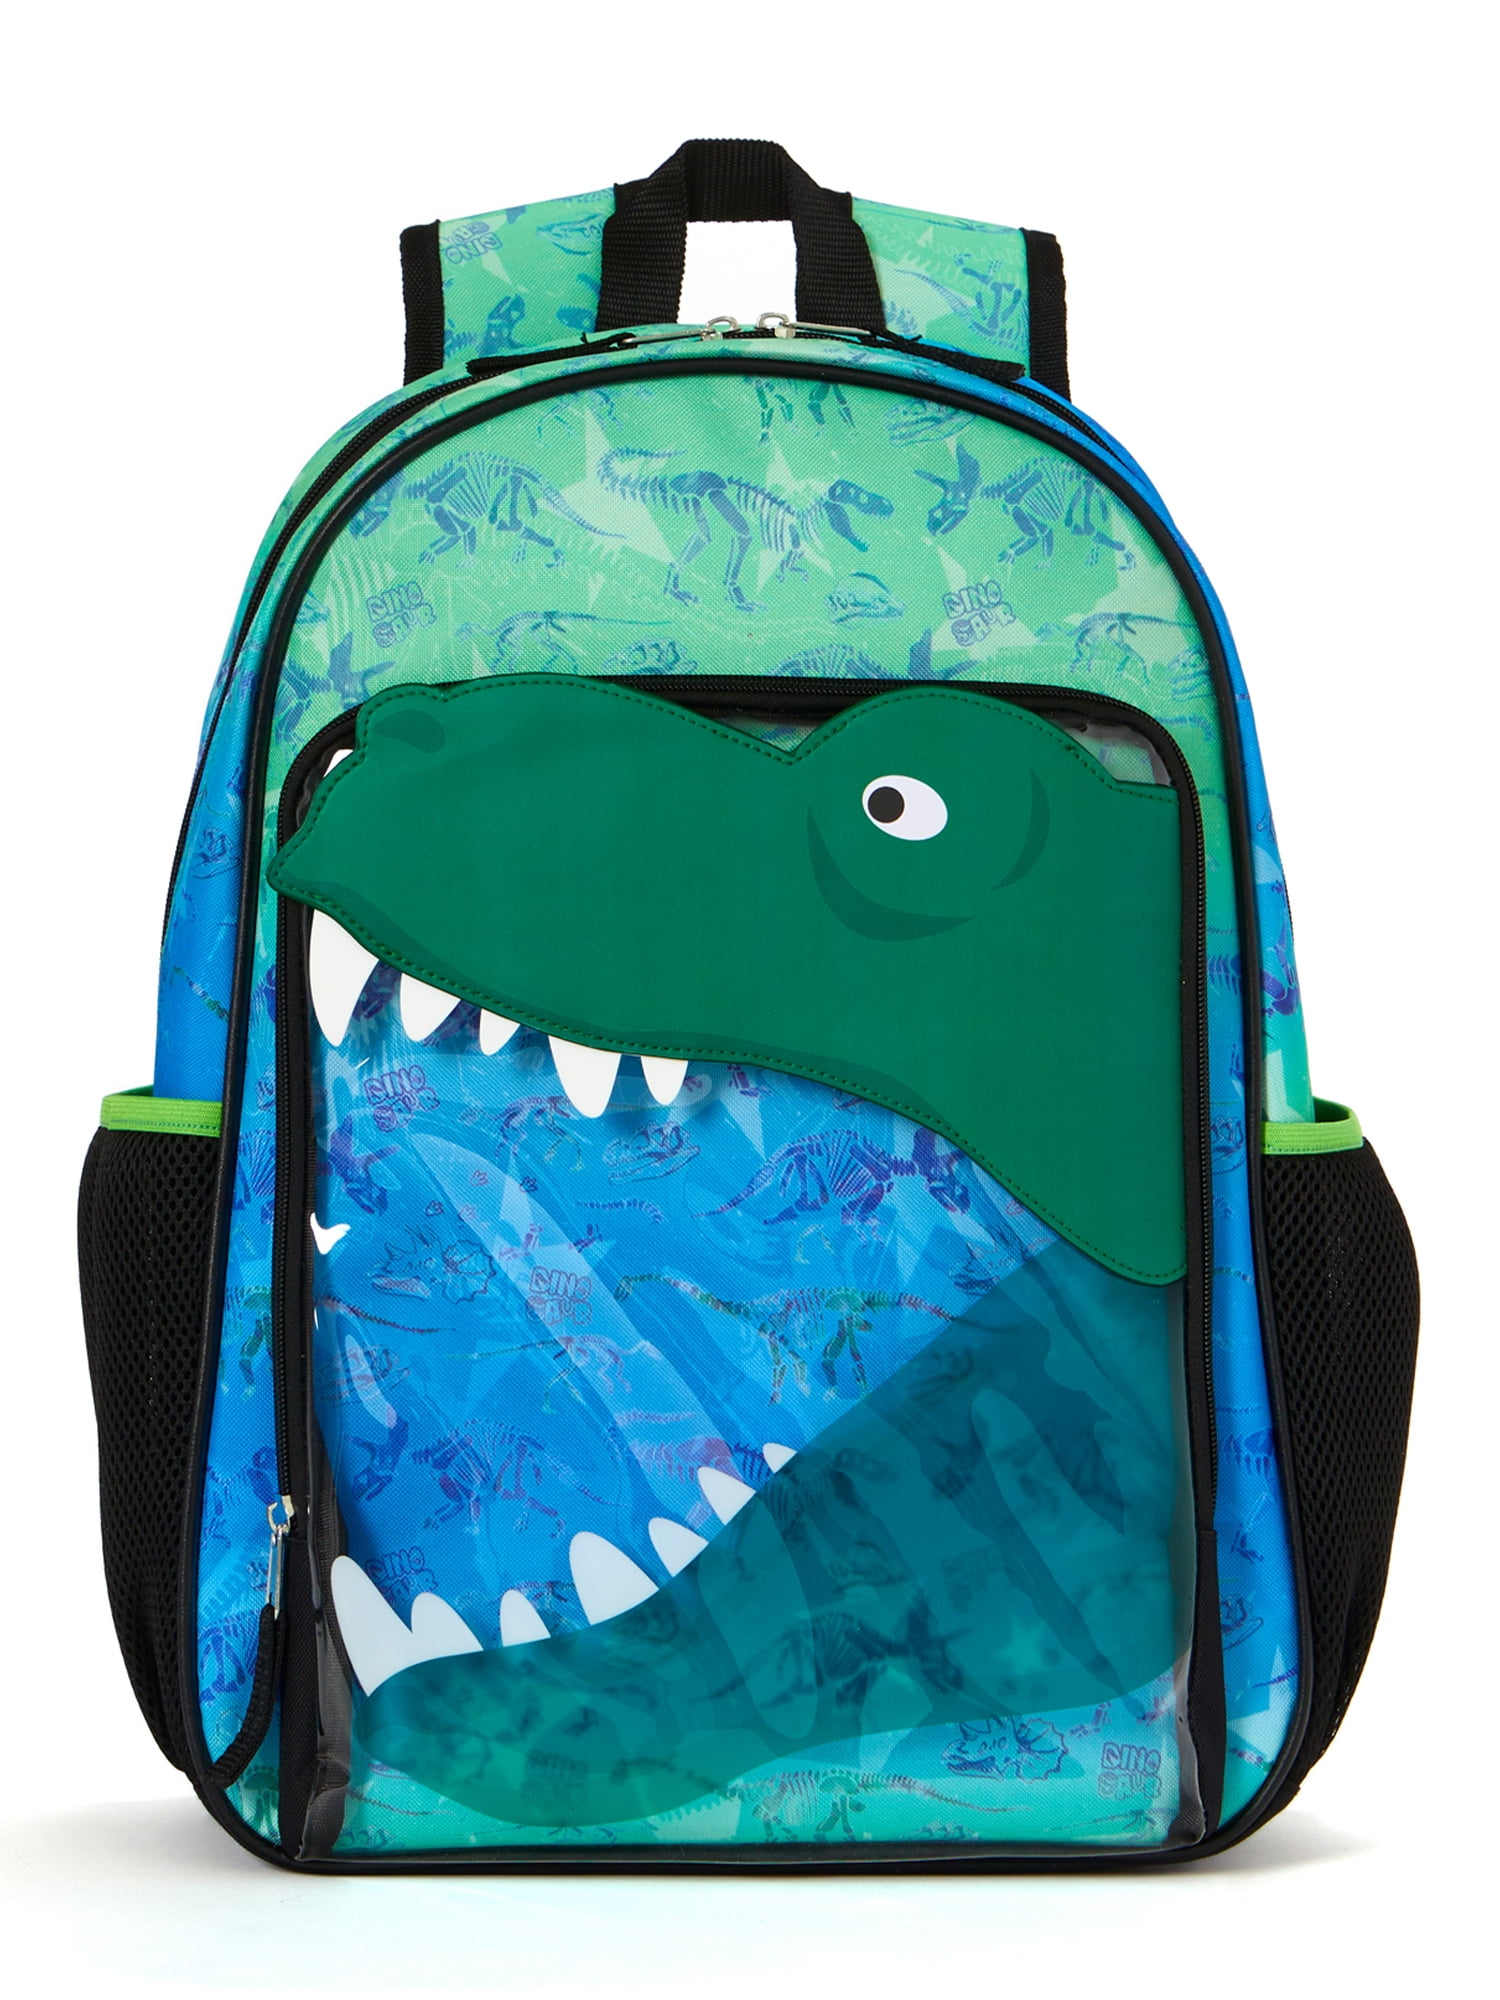 Free Art - Dinosaur running fast while wearing a backpack